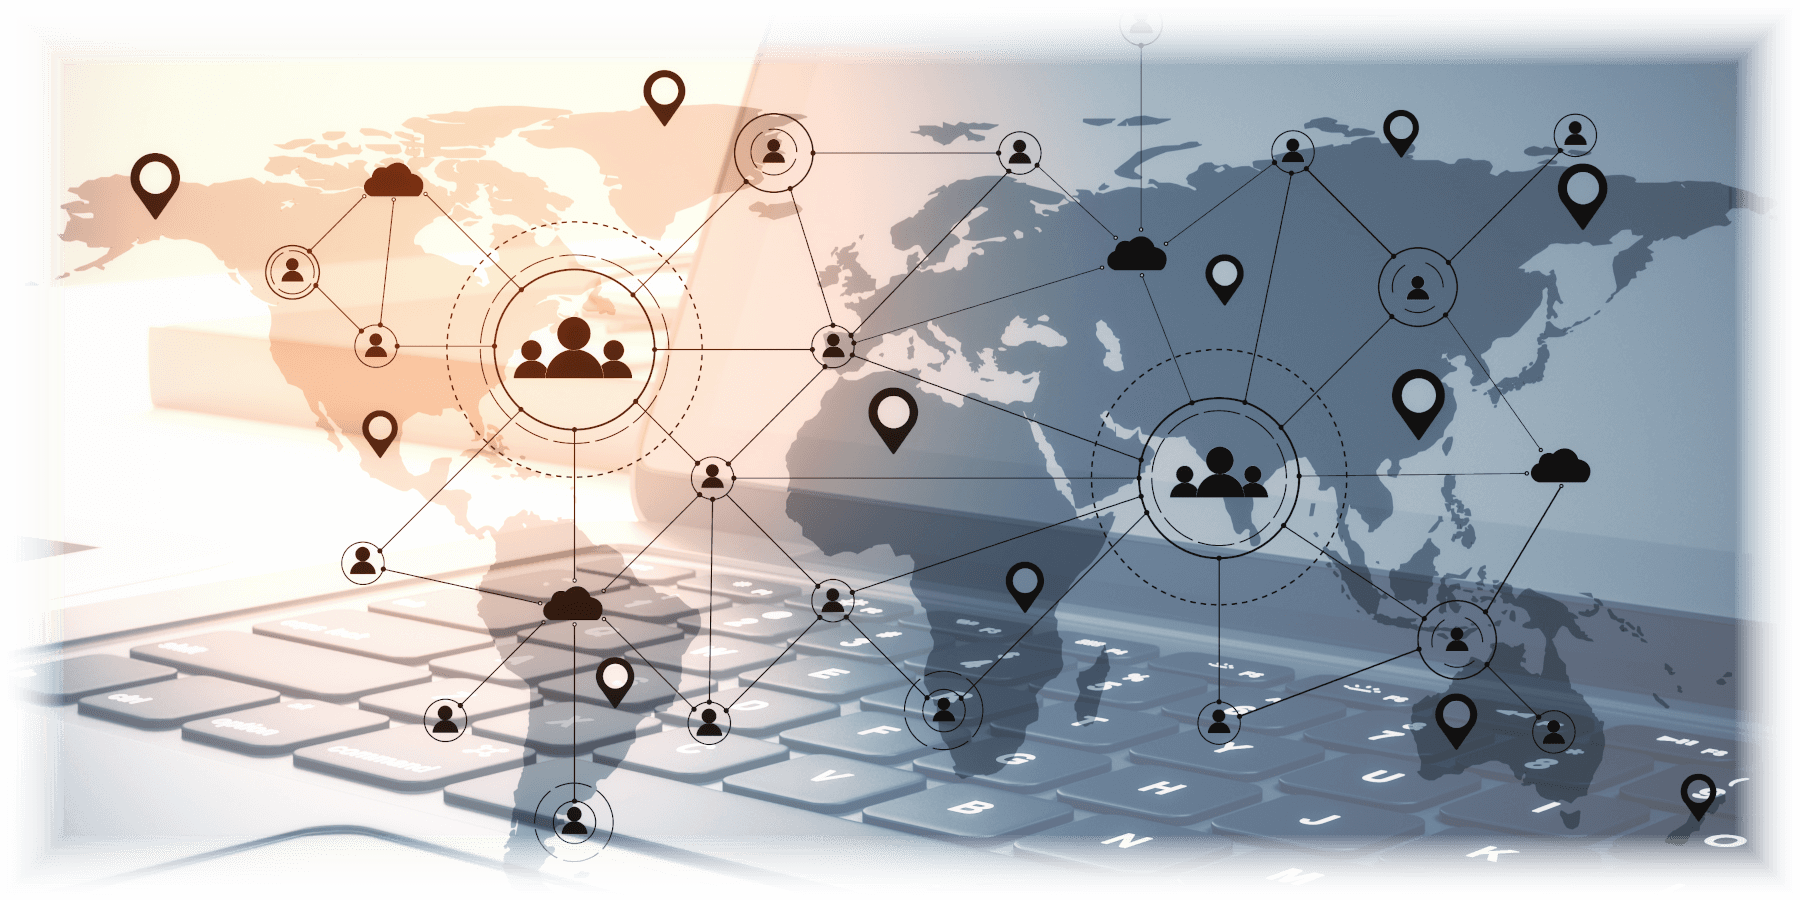 World Map with icons connected by lines to demonstrate remote access networks